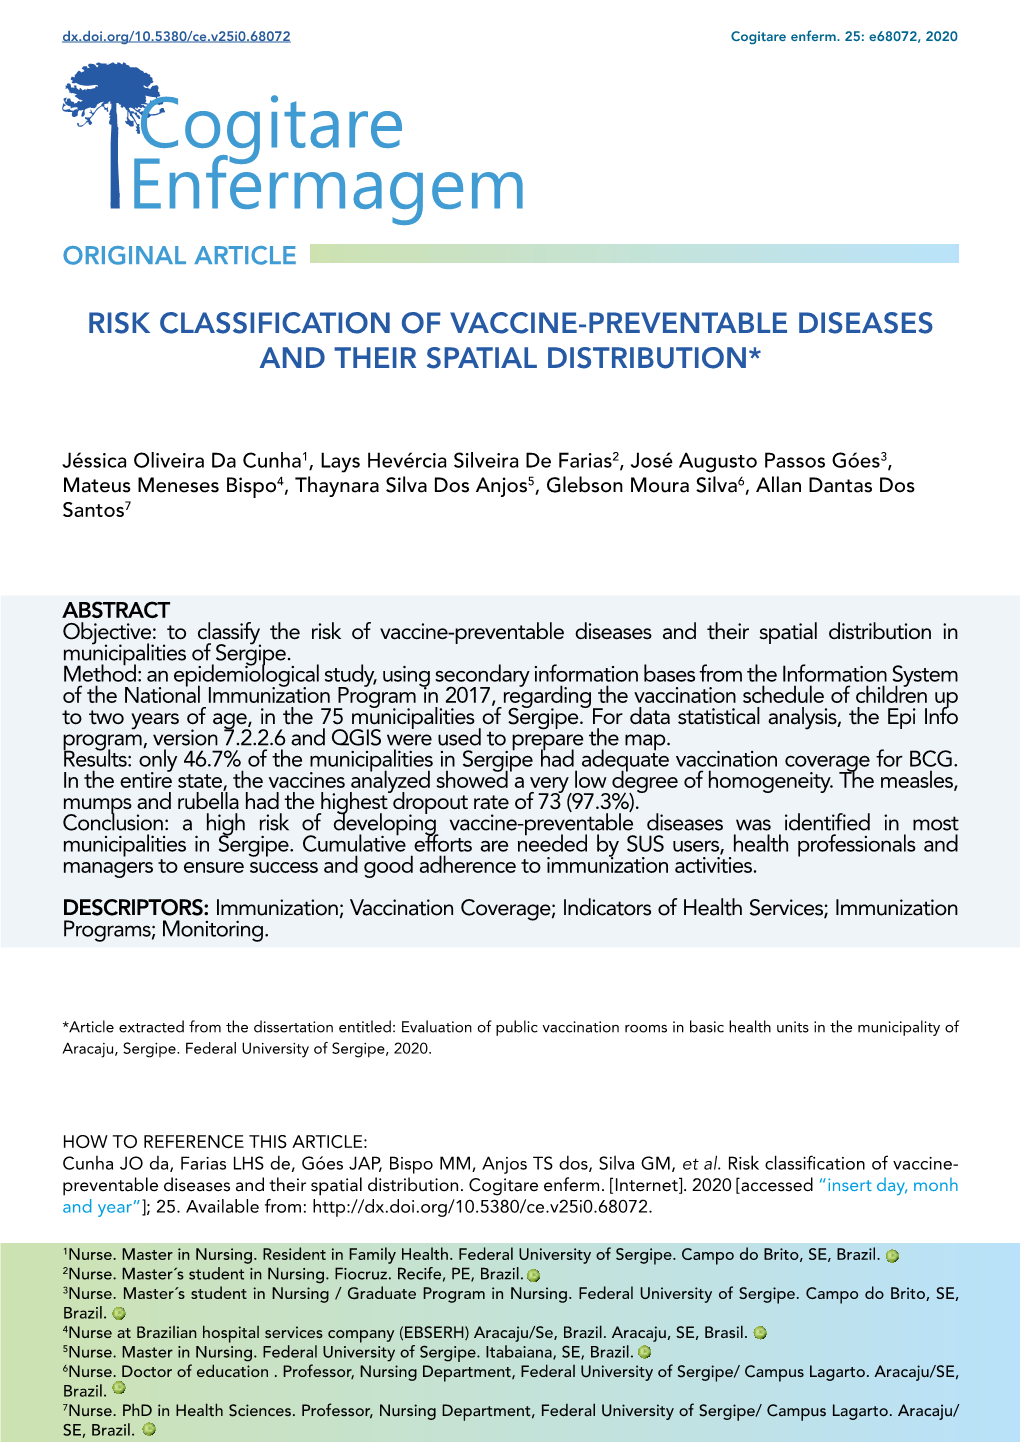 Risk Classification of Vaccine-Preventable Diseases and Their Spatial Distribution*